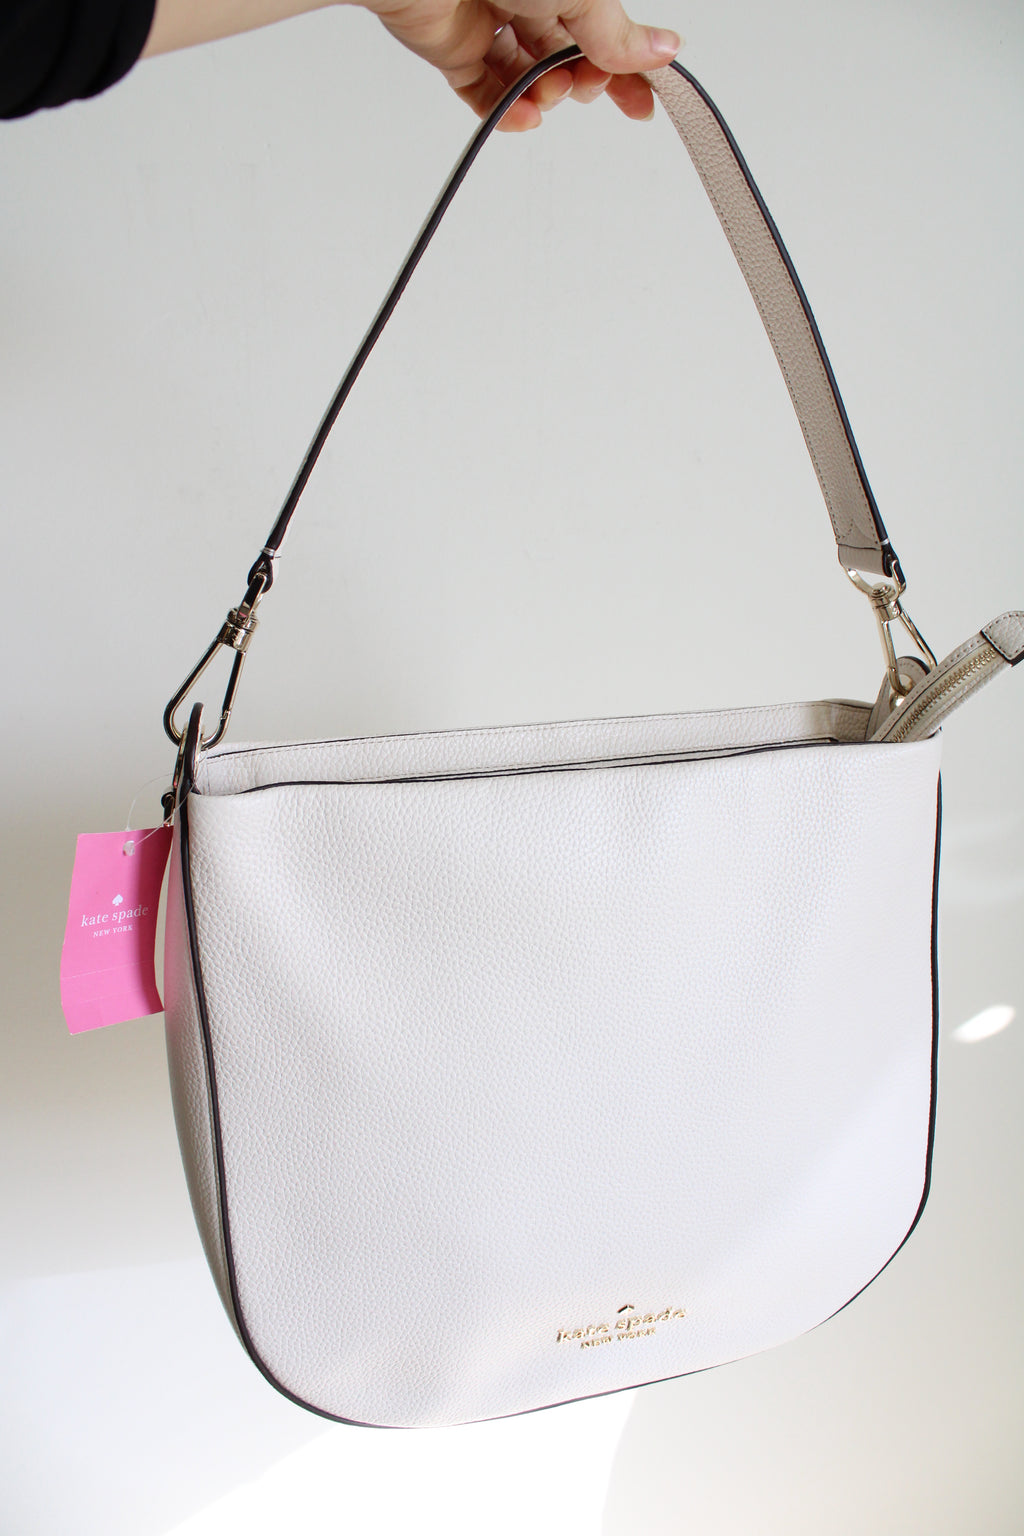 NEW Kate Spade New York Lexy White Pebble Leather Parchment Shoulder Bag